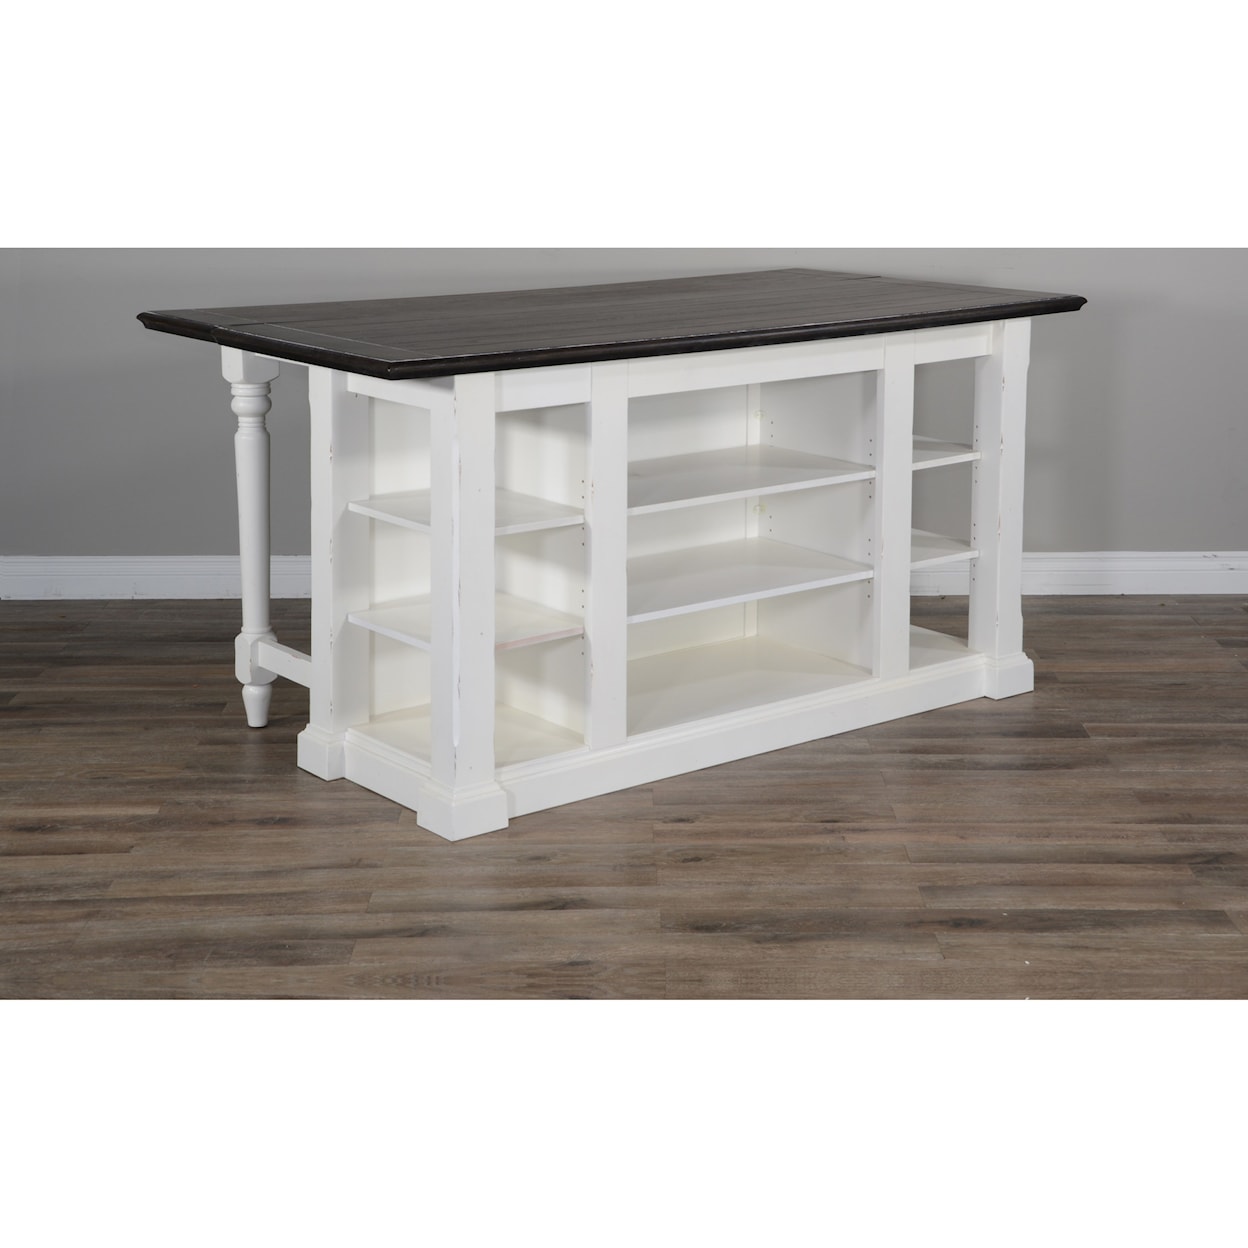 Sunny Designs Carriage House Kitchen Island